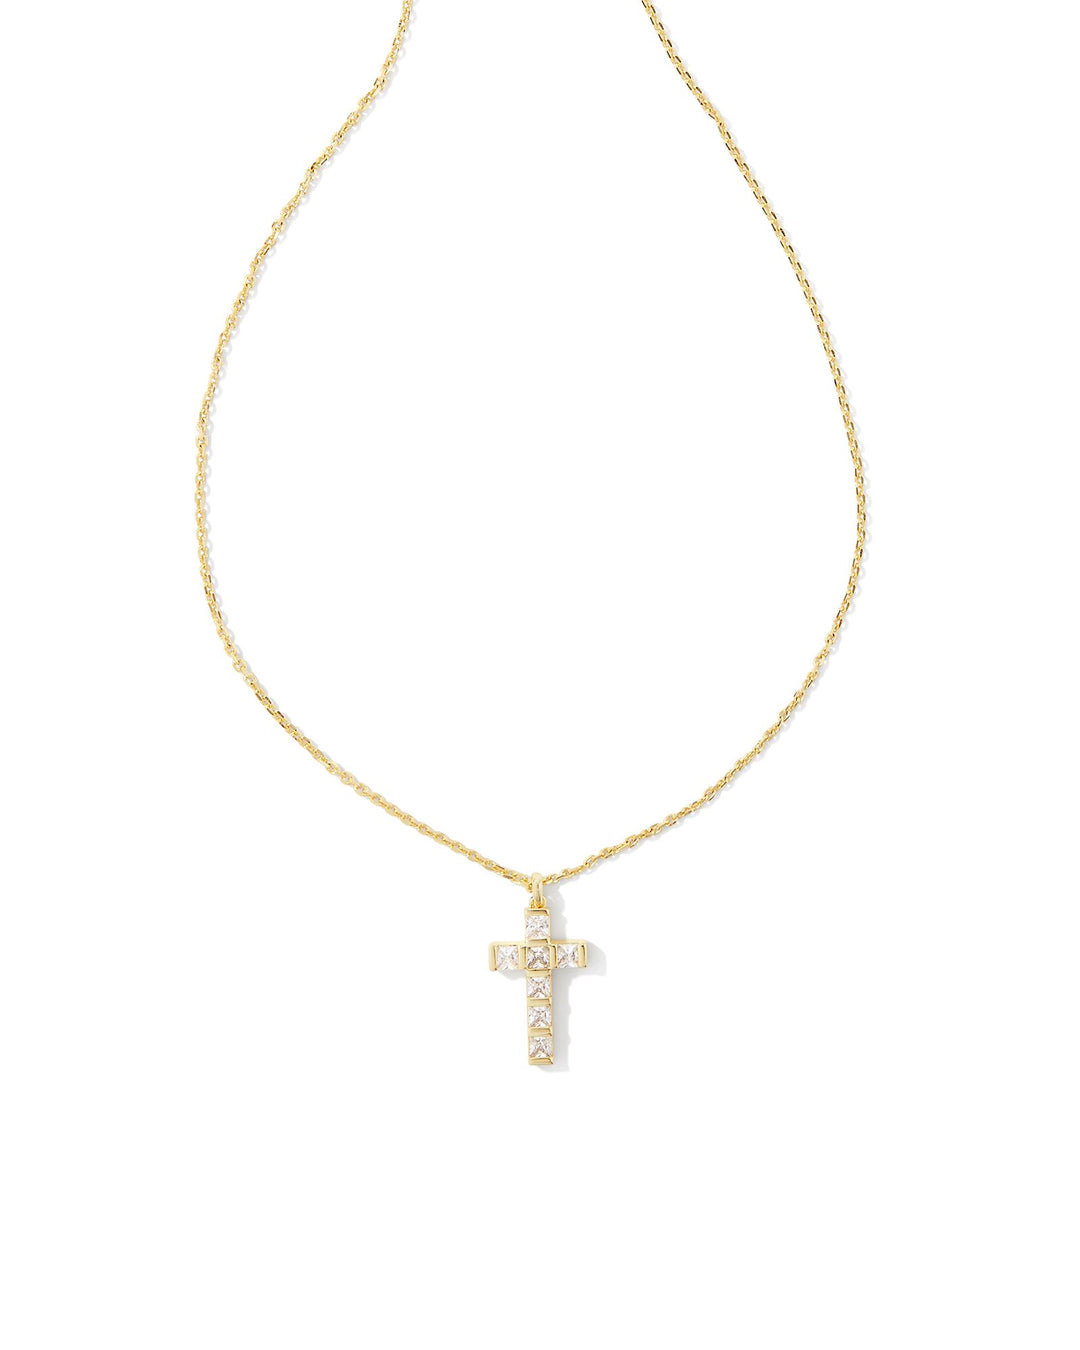 GRACIE CROSS SHORT PENDANT NECKLACE - GOLD WHITE CRYSTAL